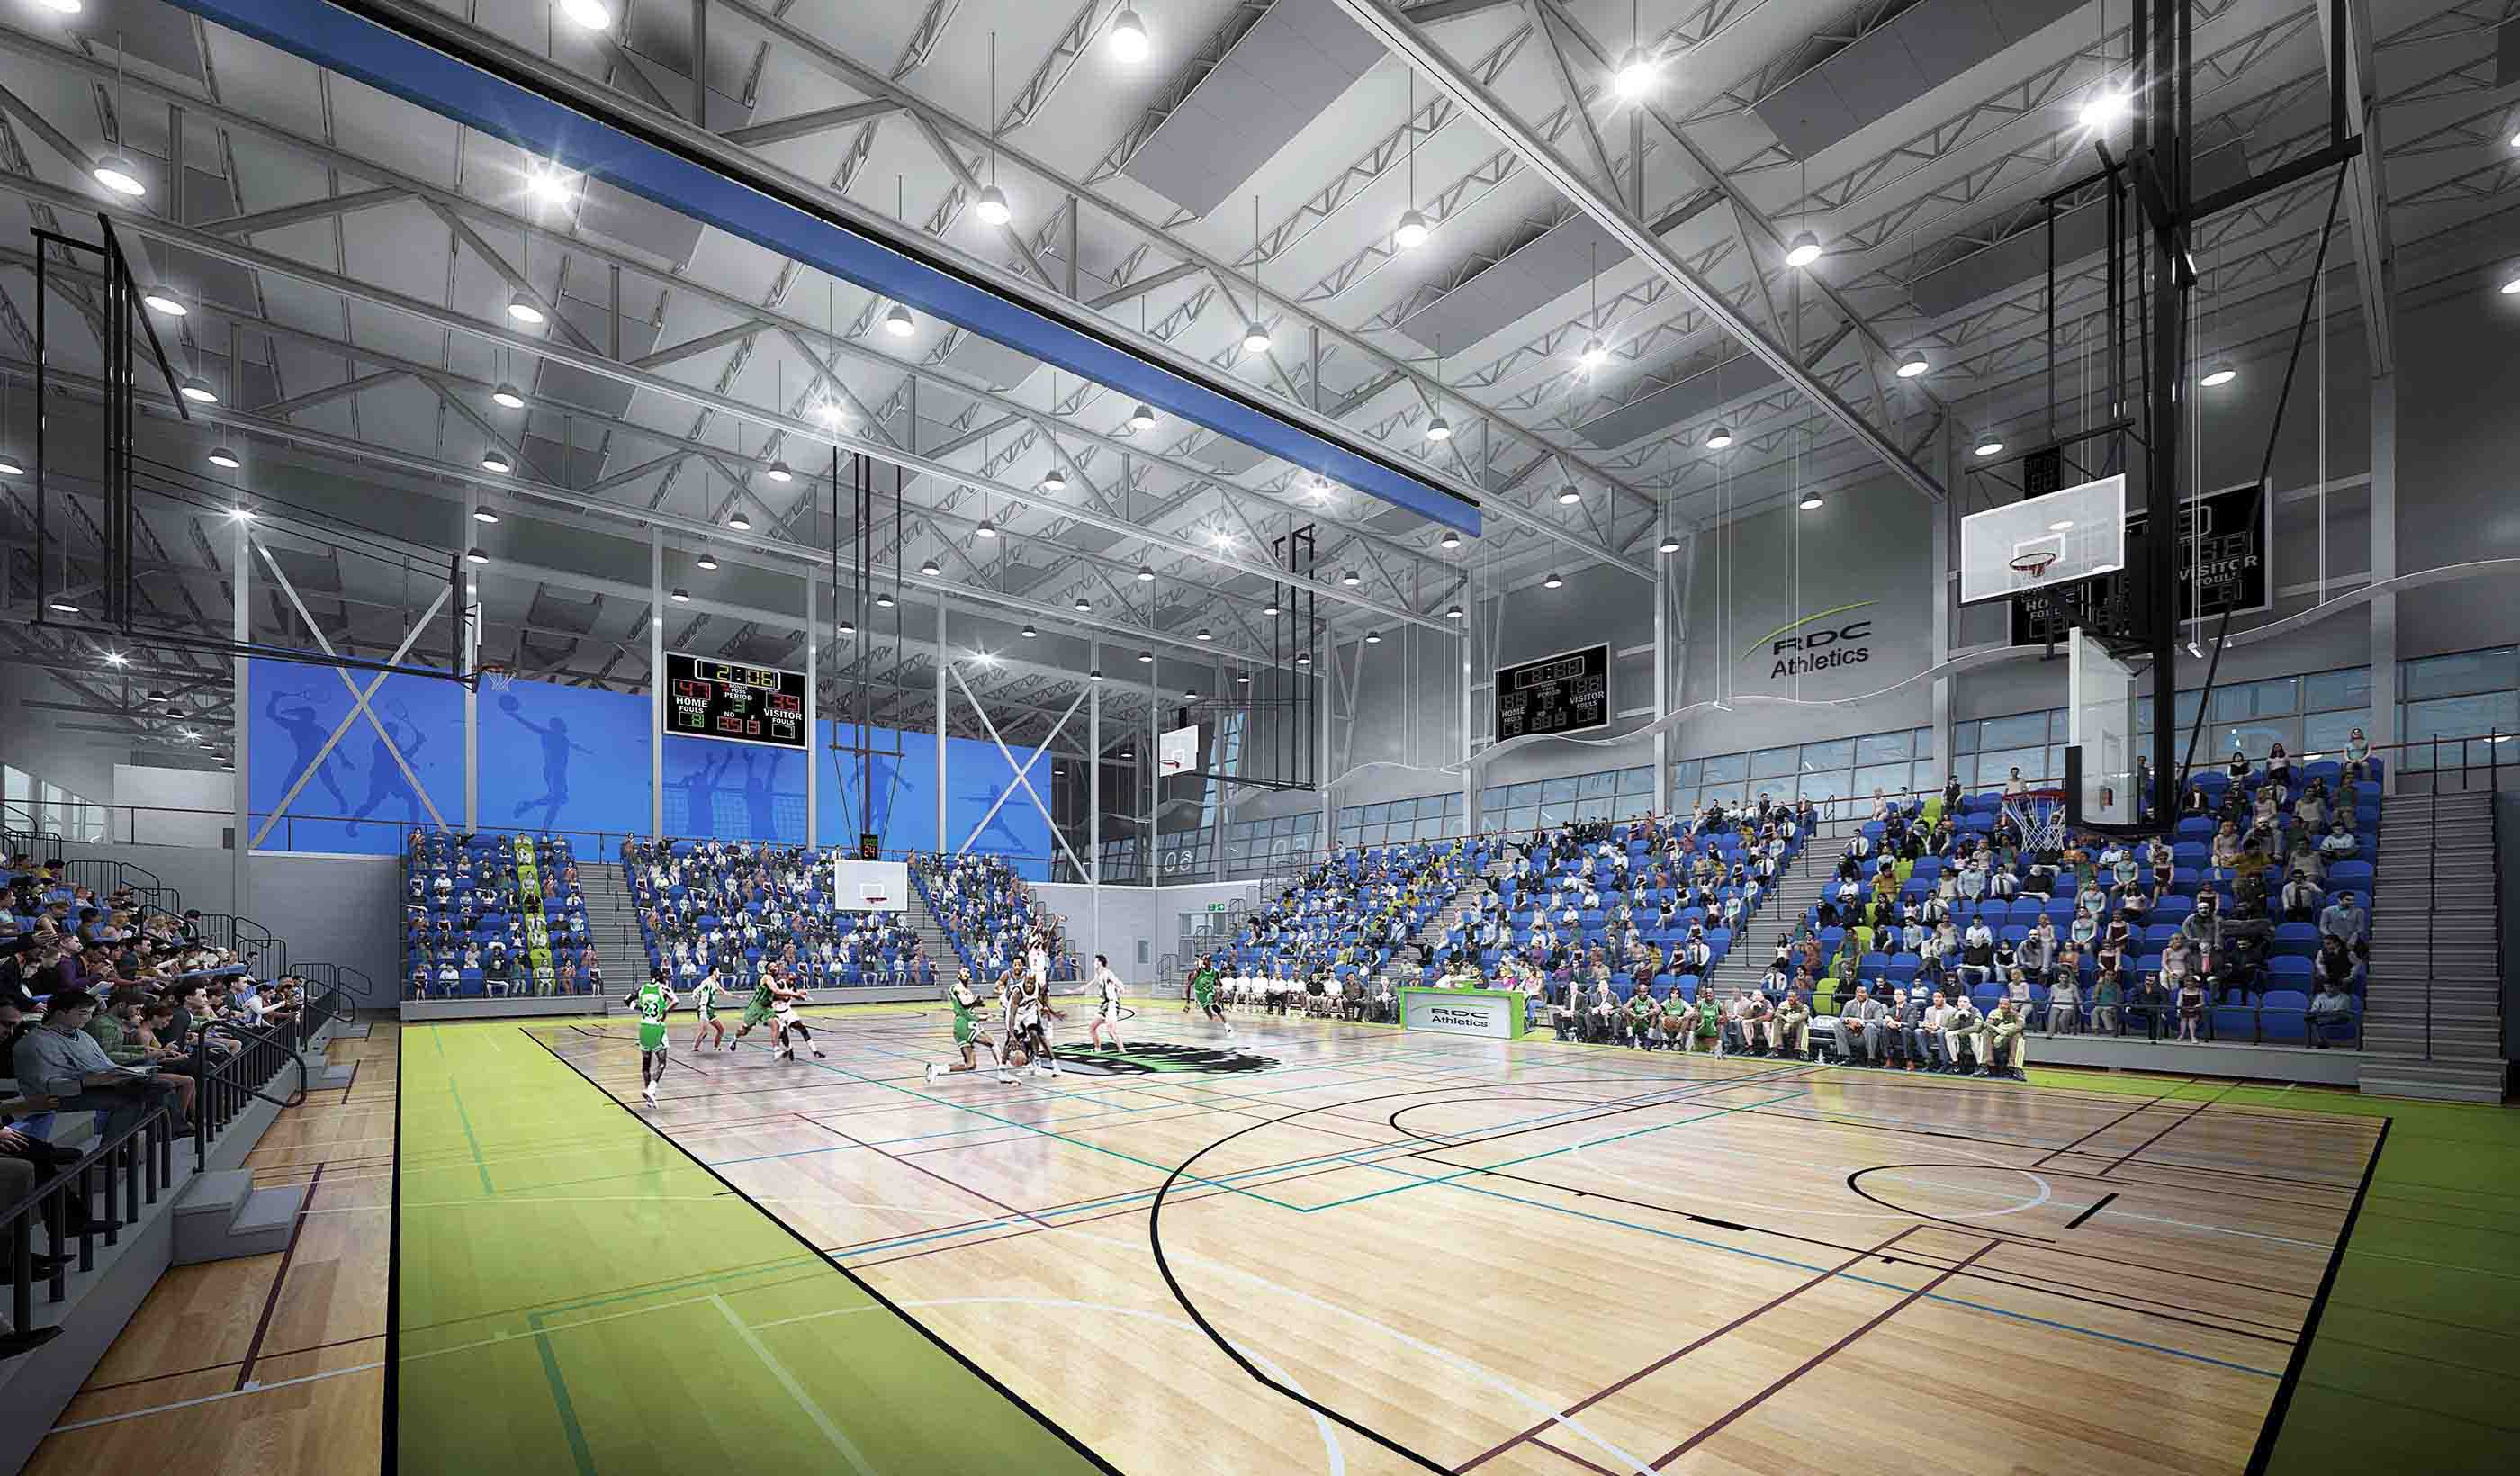 Building a legacy: Designing sports facilities that serve communities for decades